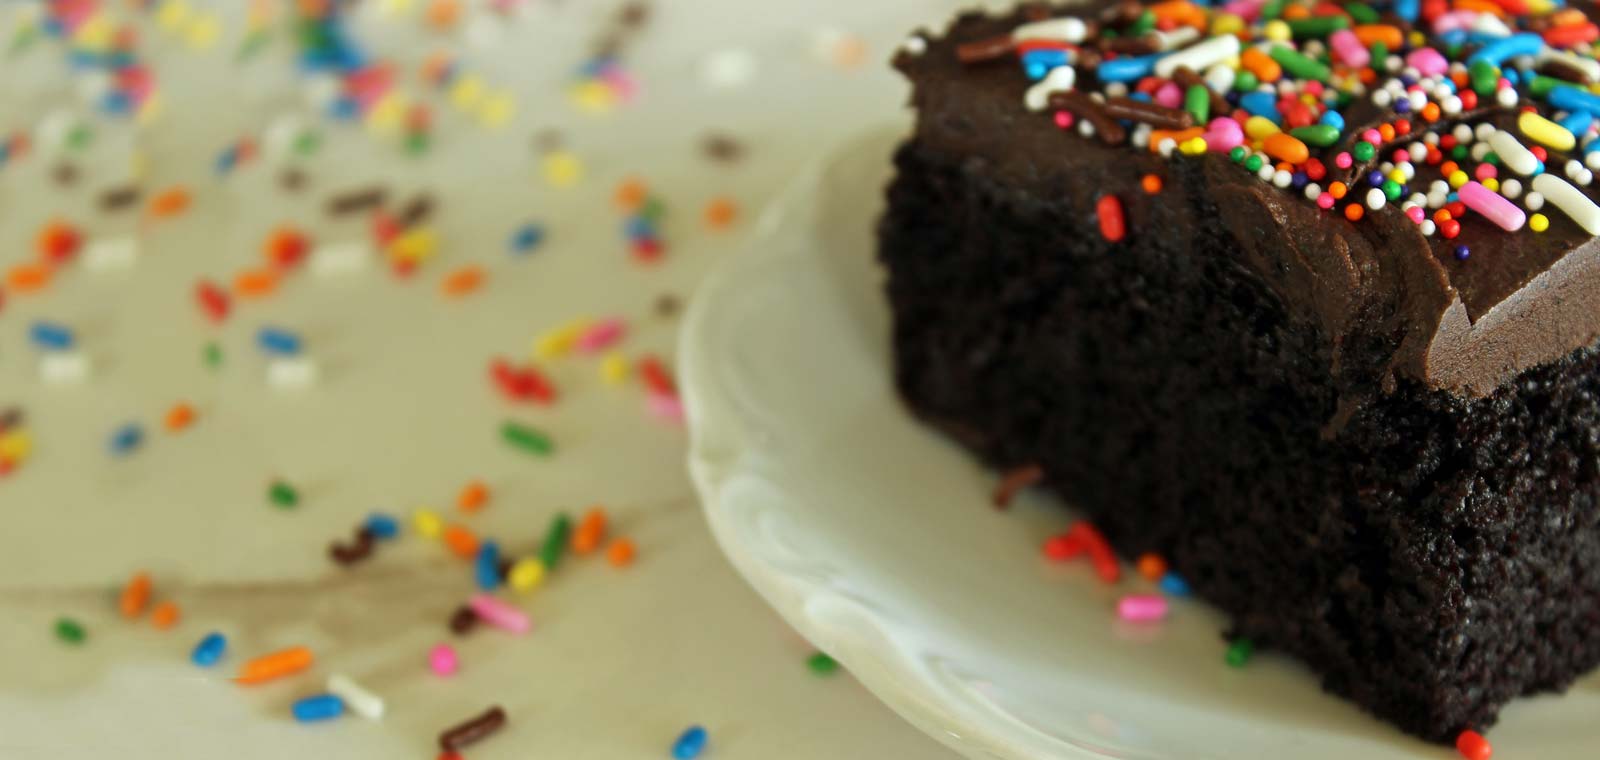 Can Investors Have Their Cake and Eat It, Too?